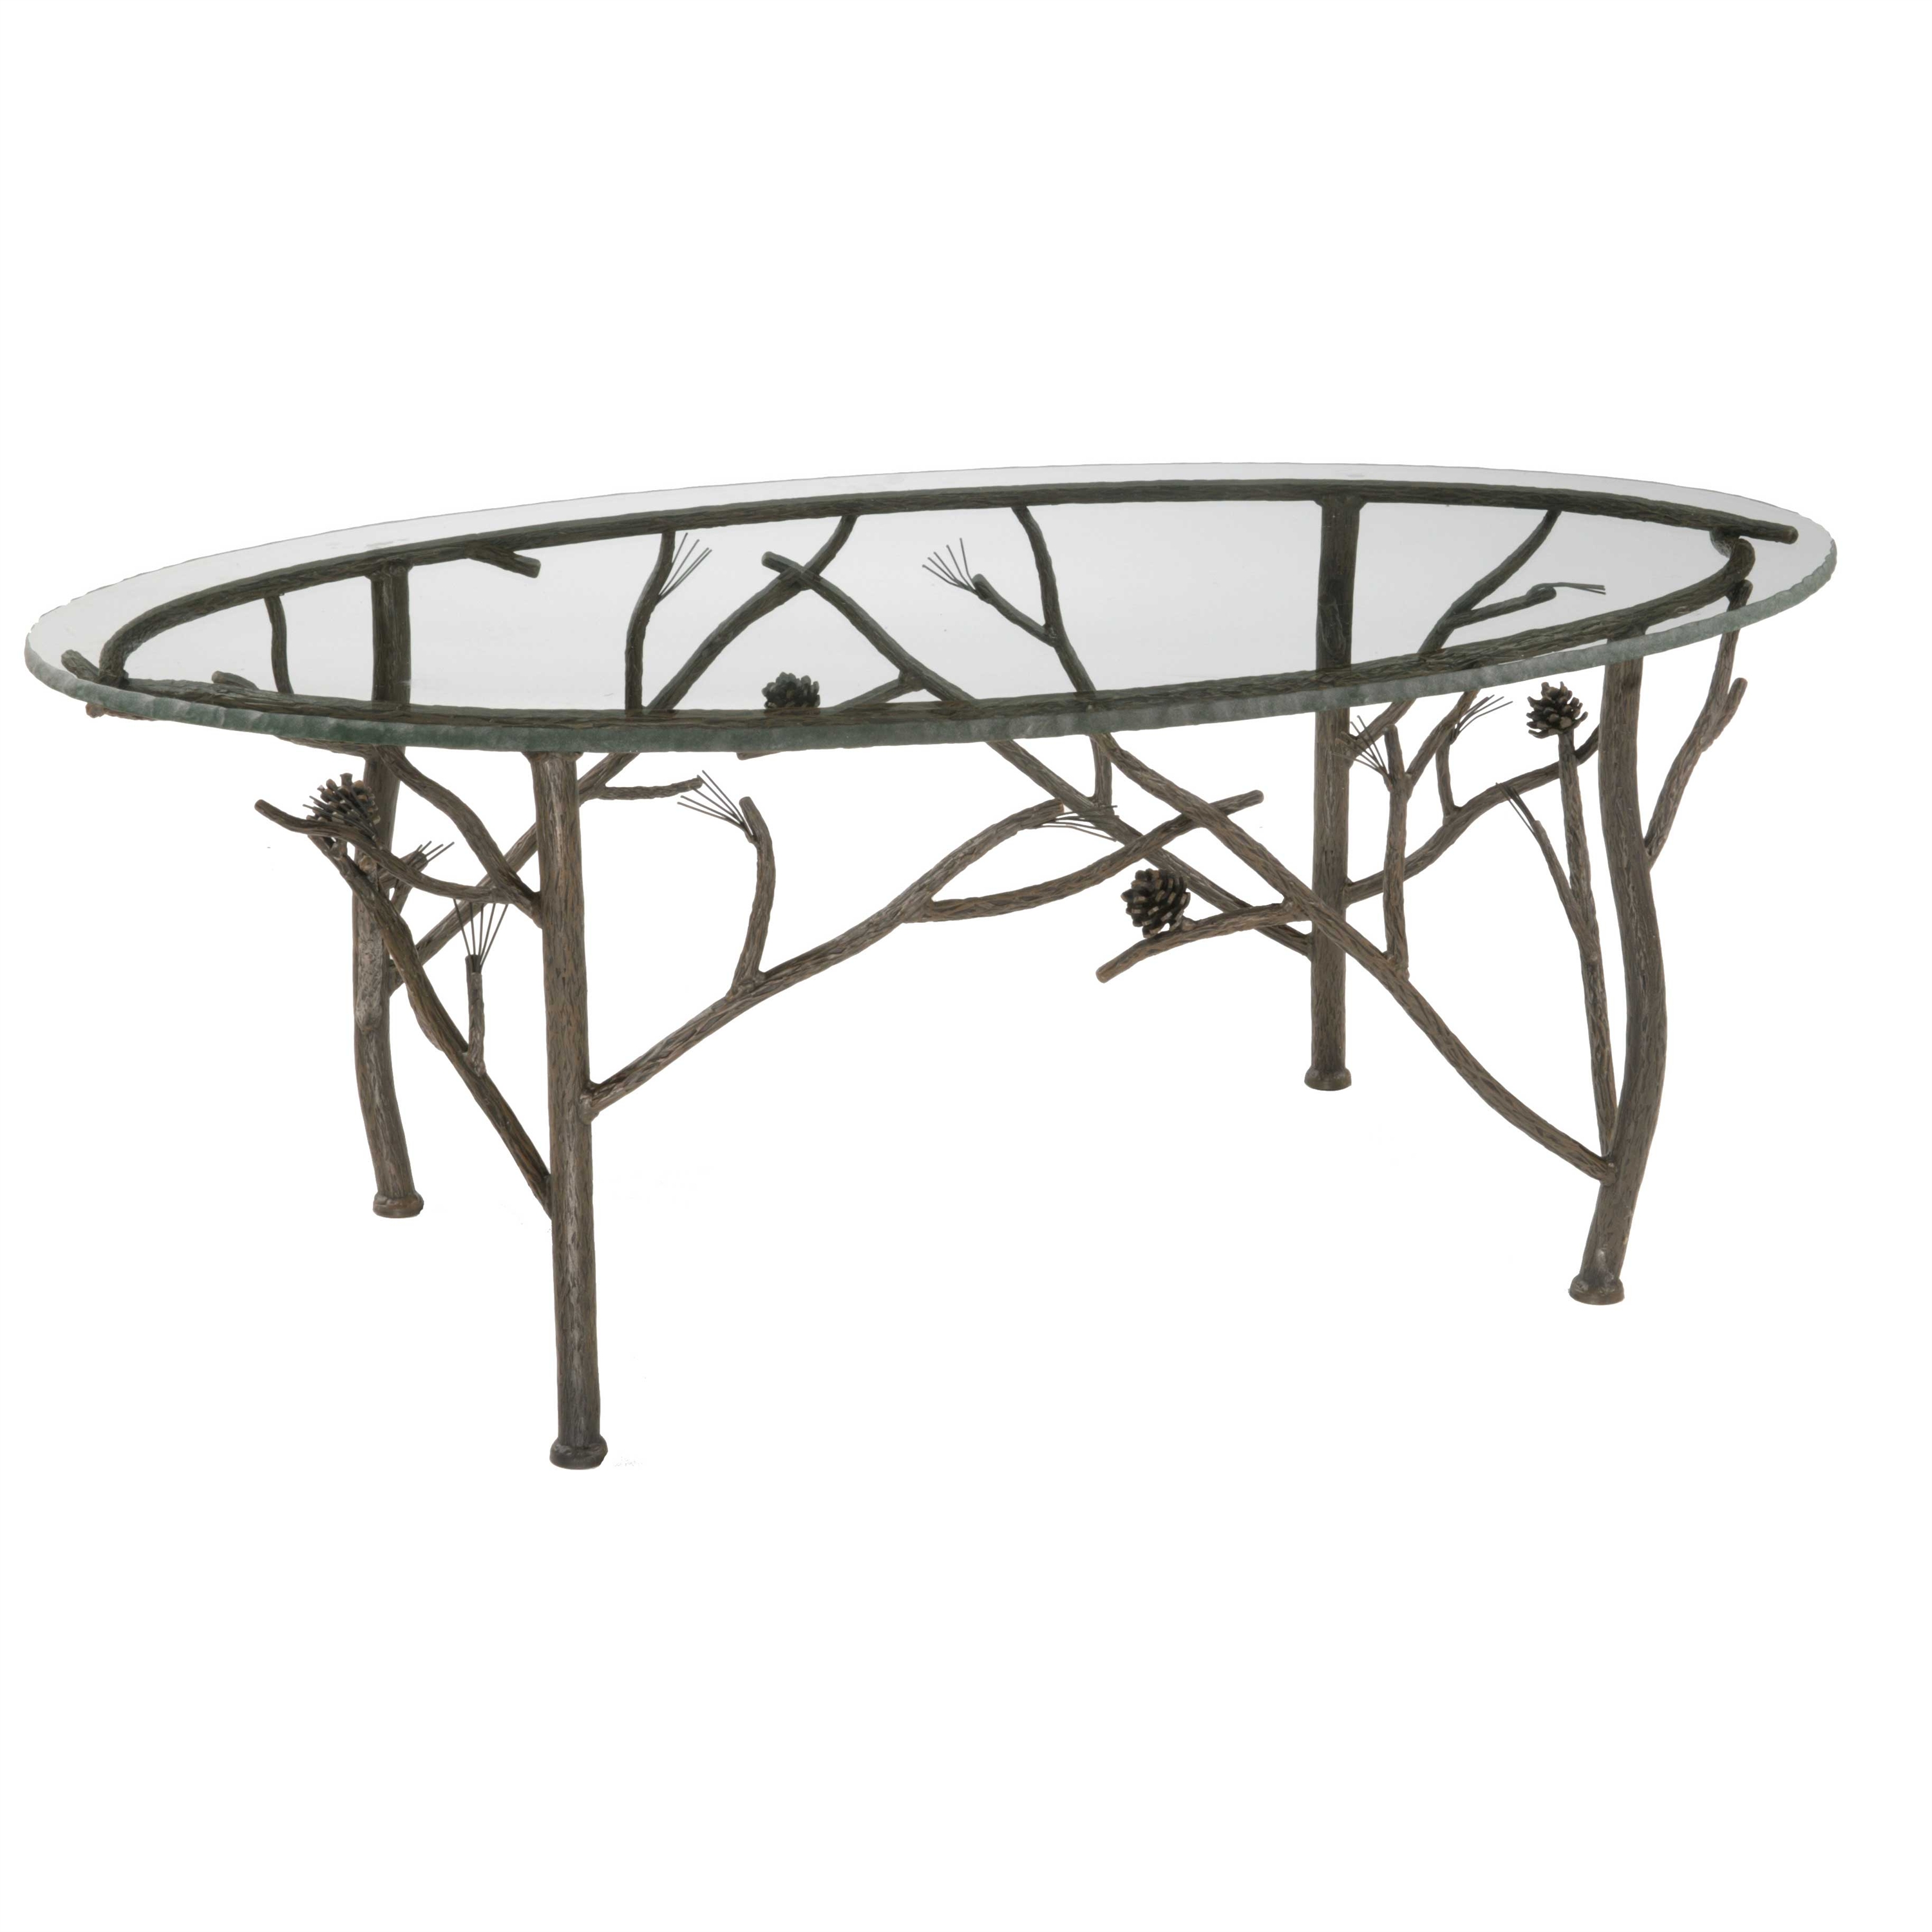 cool table legs probably perfect fun drum shaped end gallery oval metal coffee off marble top and wood base tables dark marvelous contemporary gold argos glass dining industrial